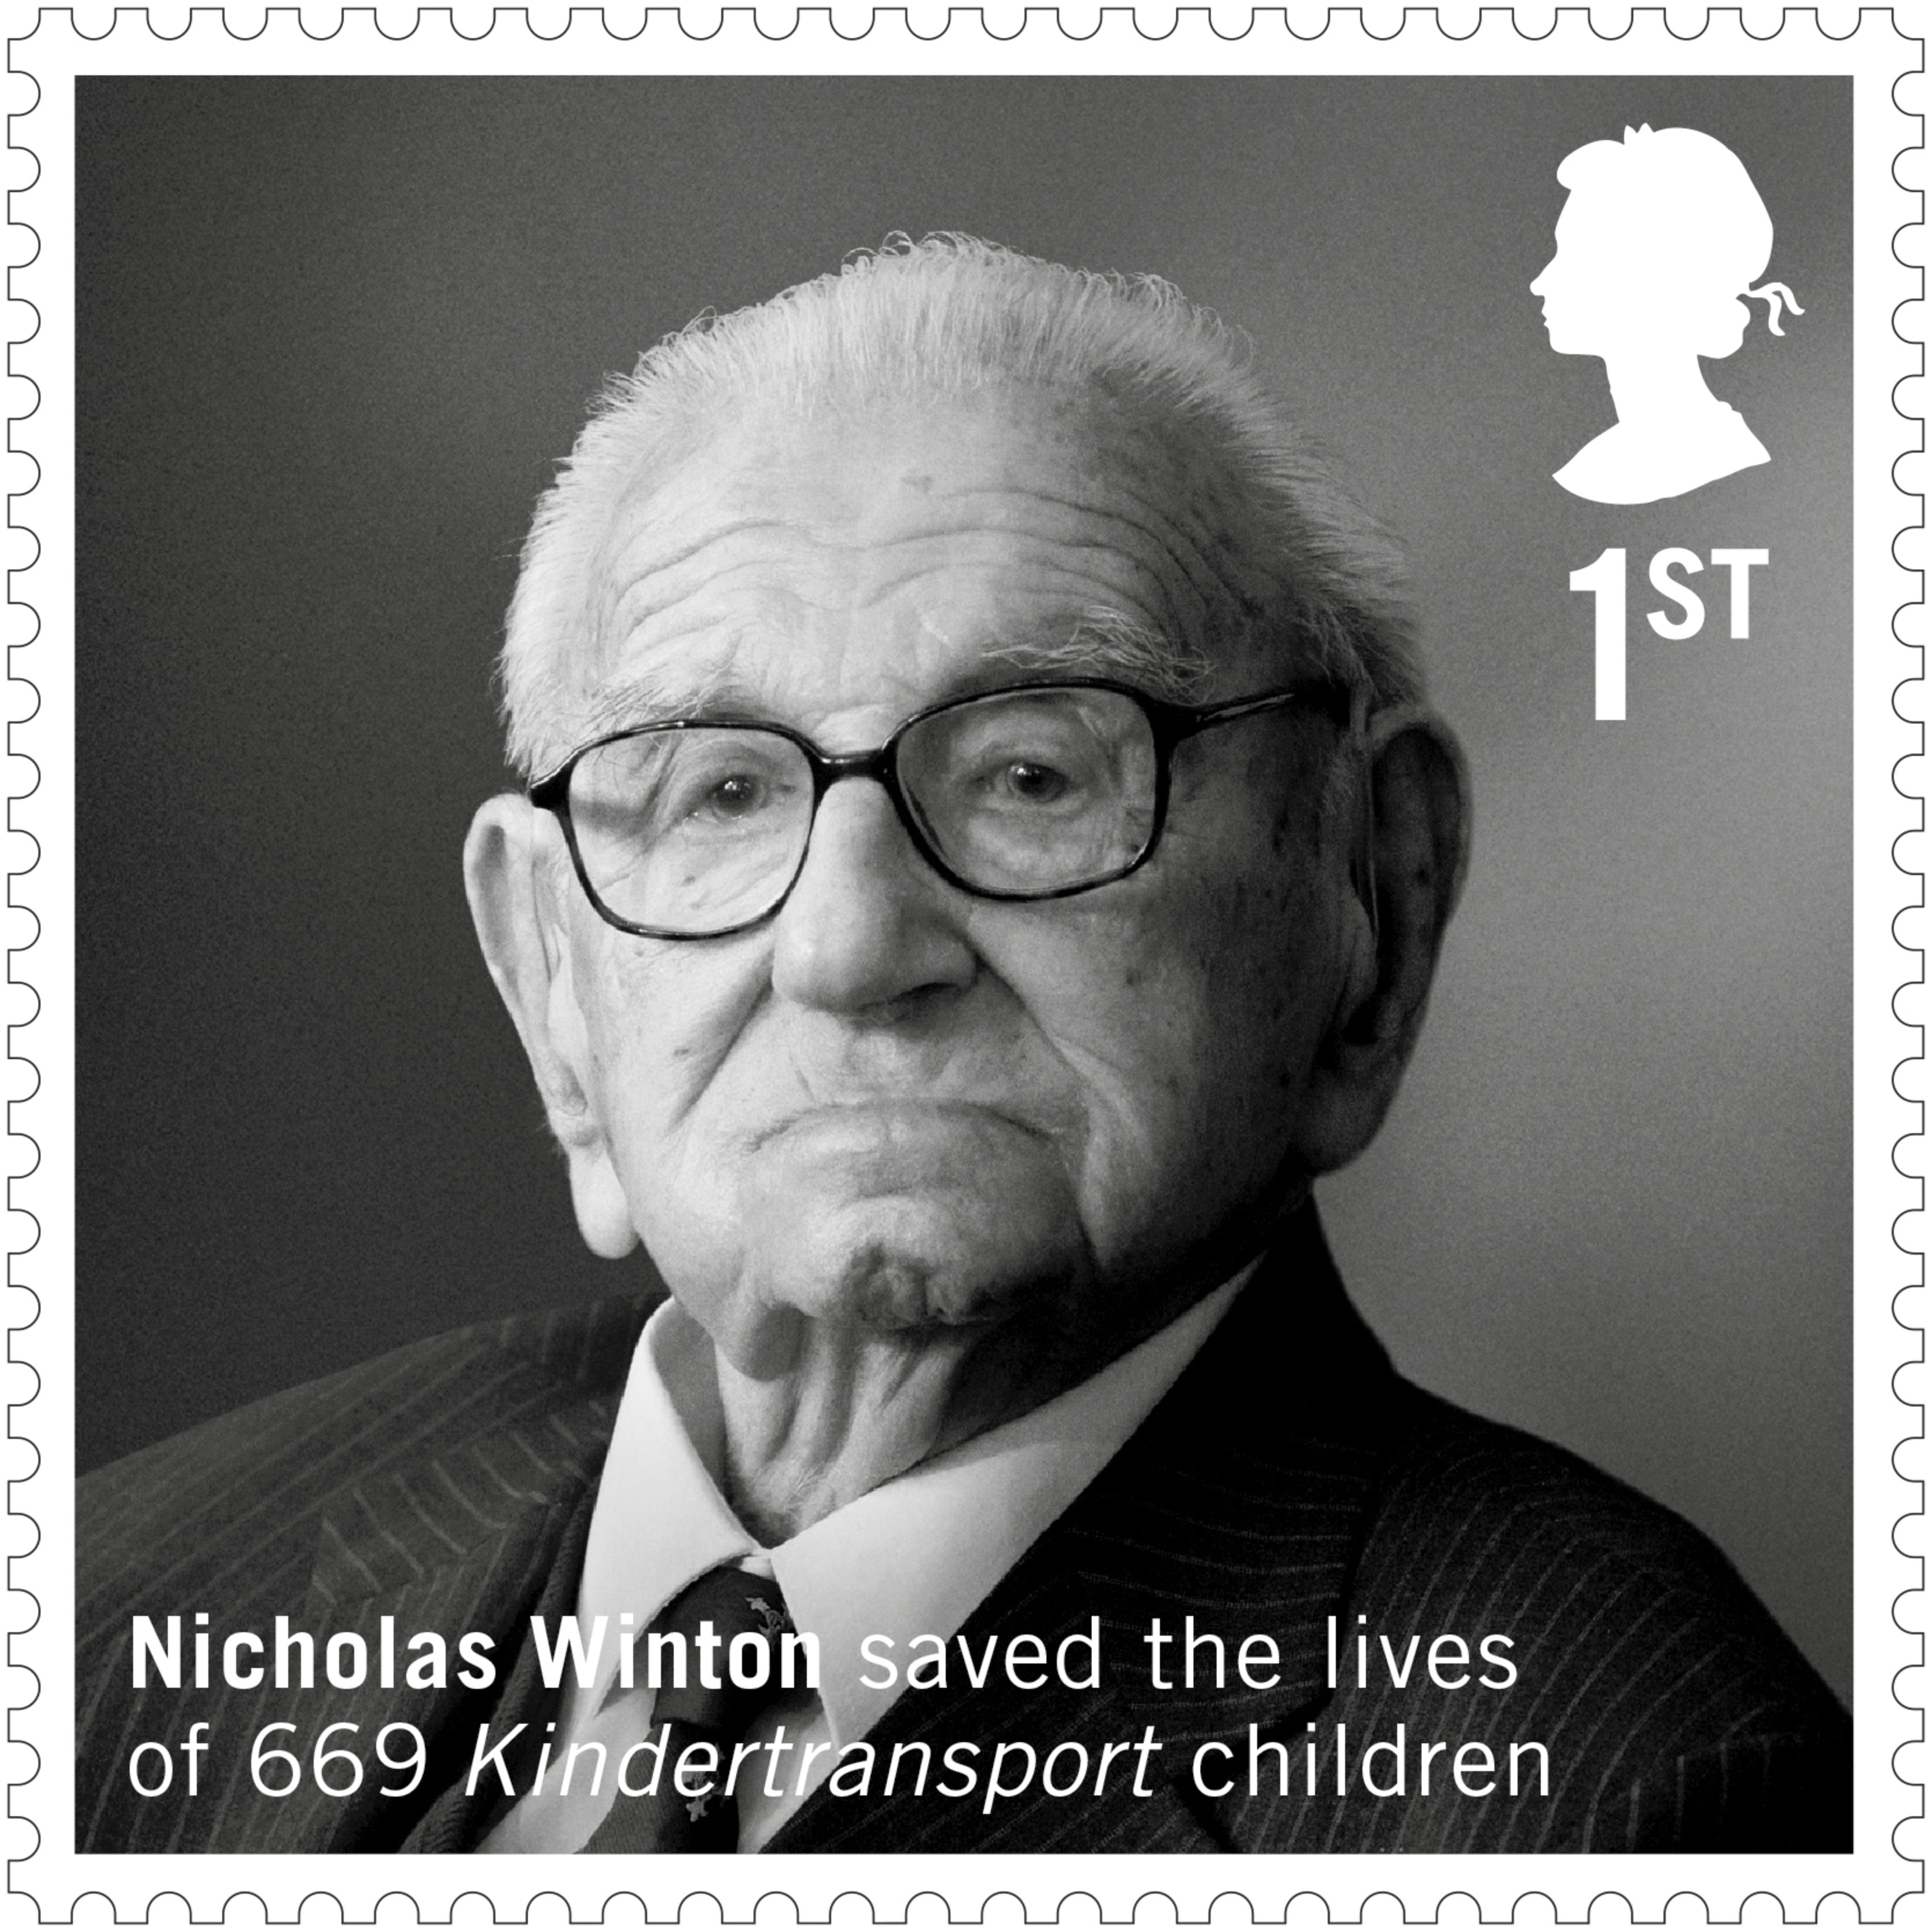 The Royal Mail's Sir Nicholas Winton's stamp – issued following a Jewish News campaign backed by 106,000 people.